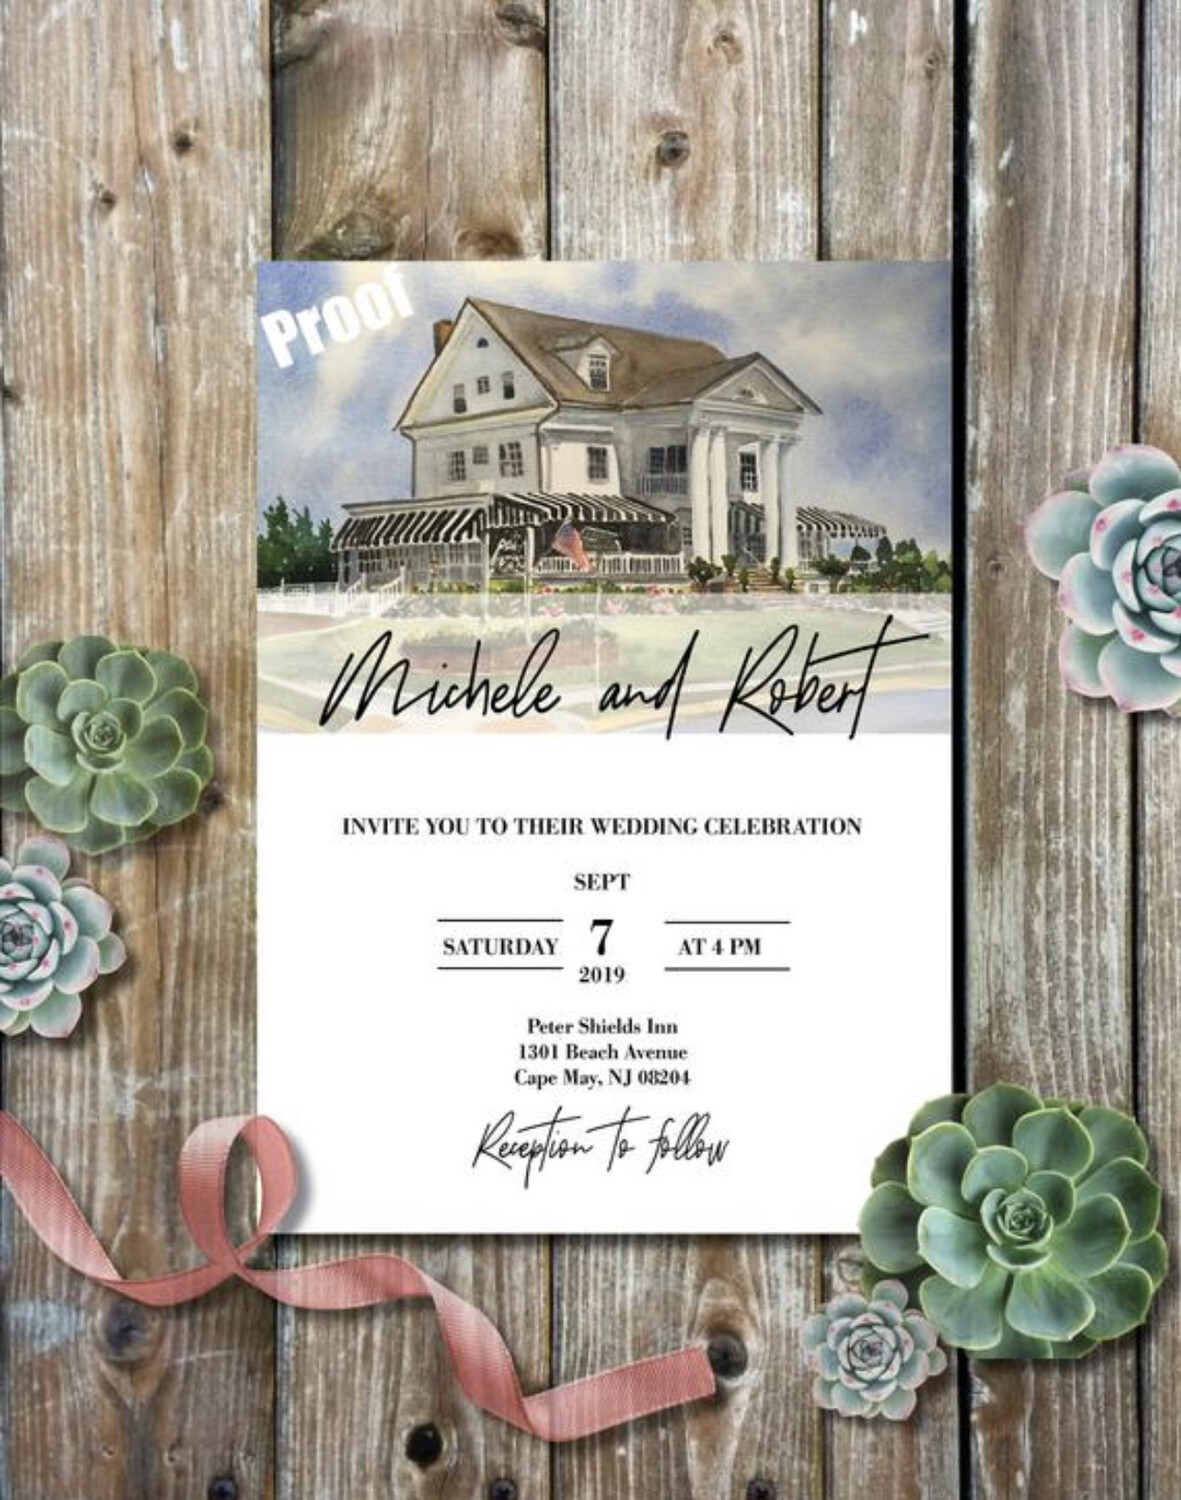 Peter Shields Inn in Cape May, NJ - Wedding Invitations on Luxurious Paper with Envelopes - Set of 25 - Watercolor Invitation 